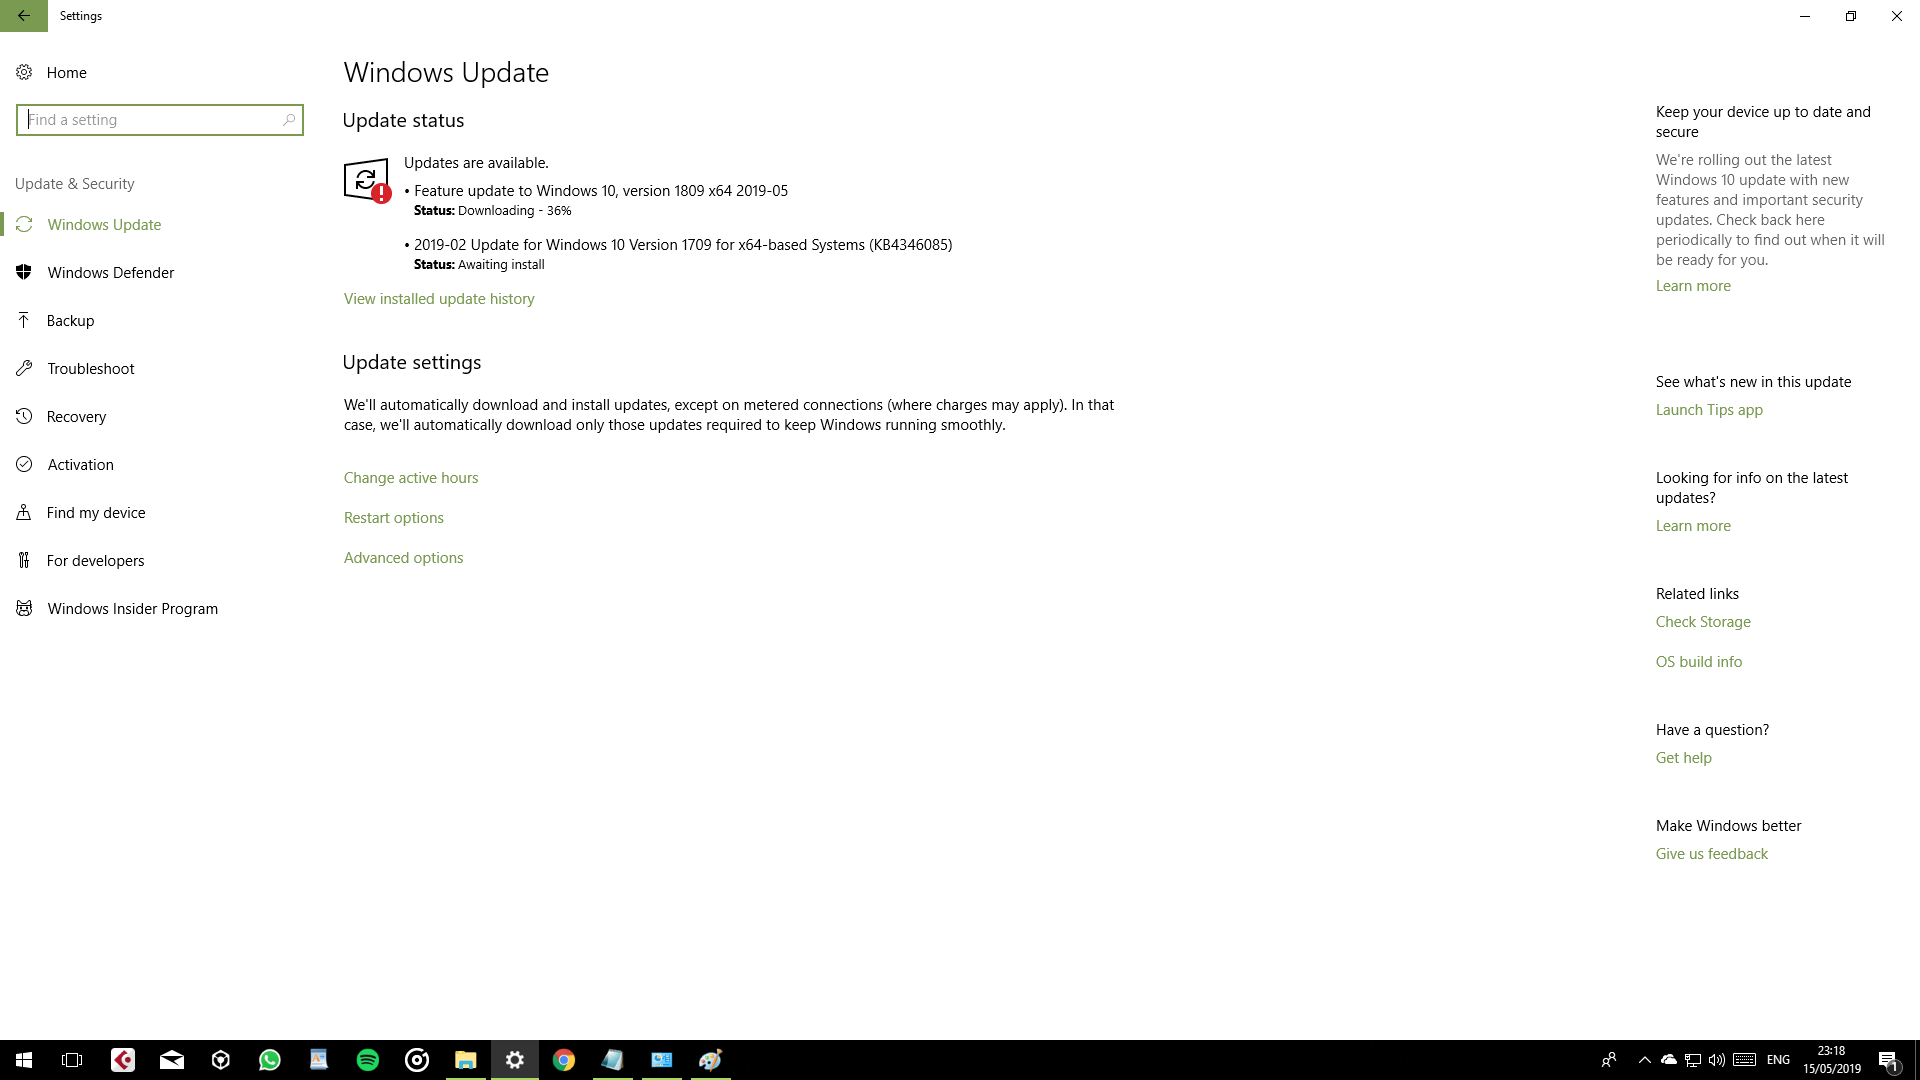 Can't Update Windows 10 (Photos Attached) - 2019-02 Update for Windows 10 Version 1709 for... 2646c220-0690-4d93-ae5a-9417bd749ea4?upload=true.png